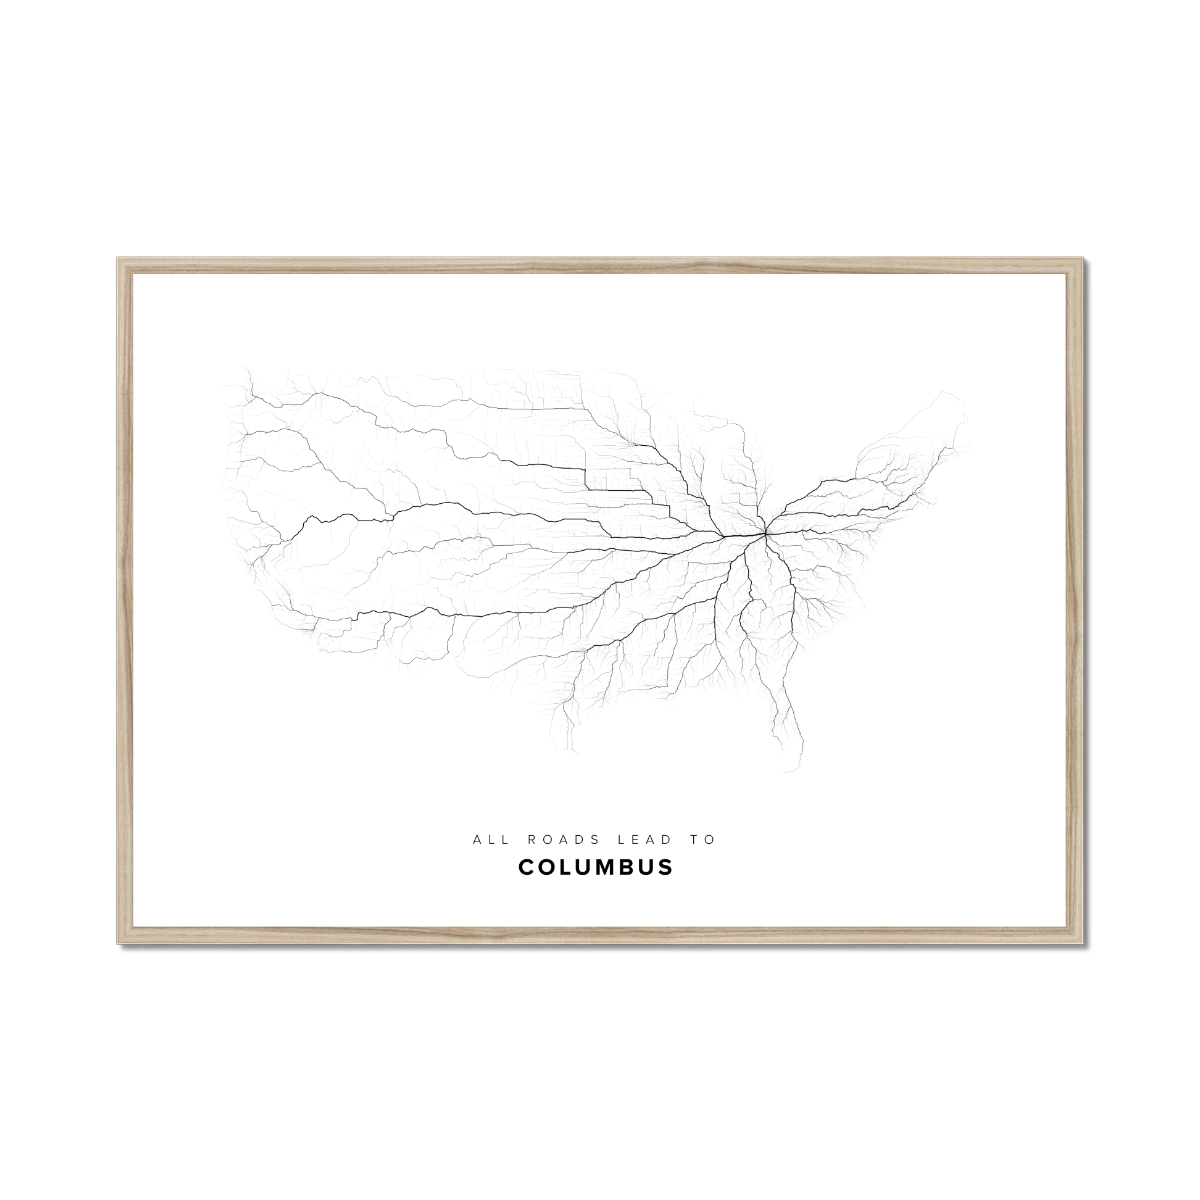 All roads lead to Columbus (United States of America) Fine Art Map Print